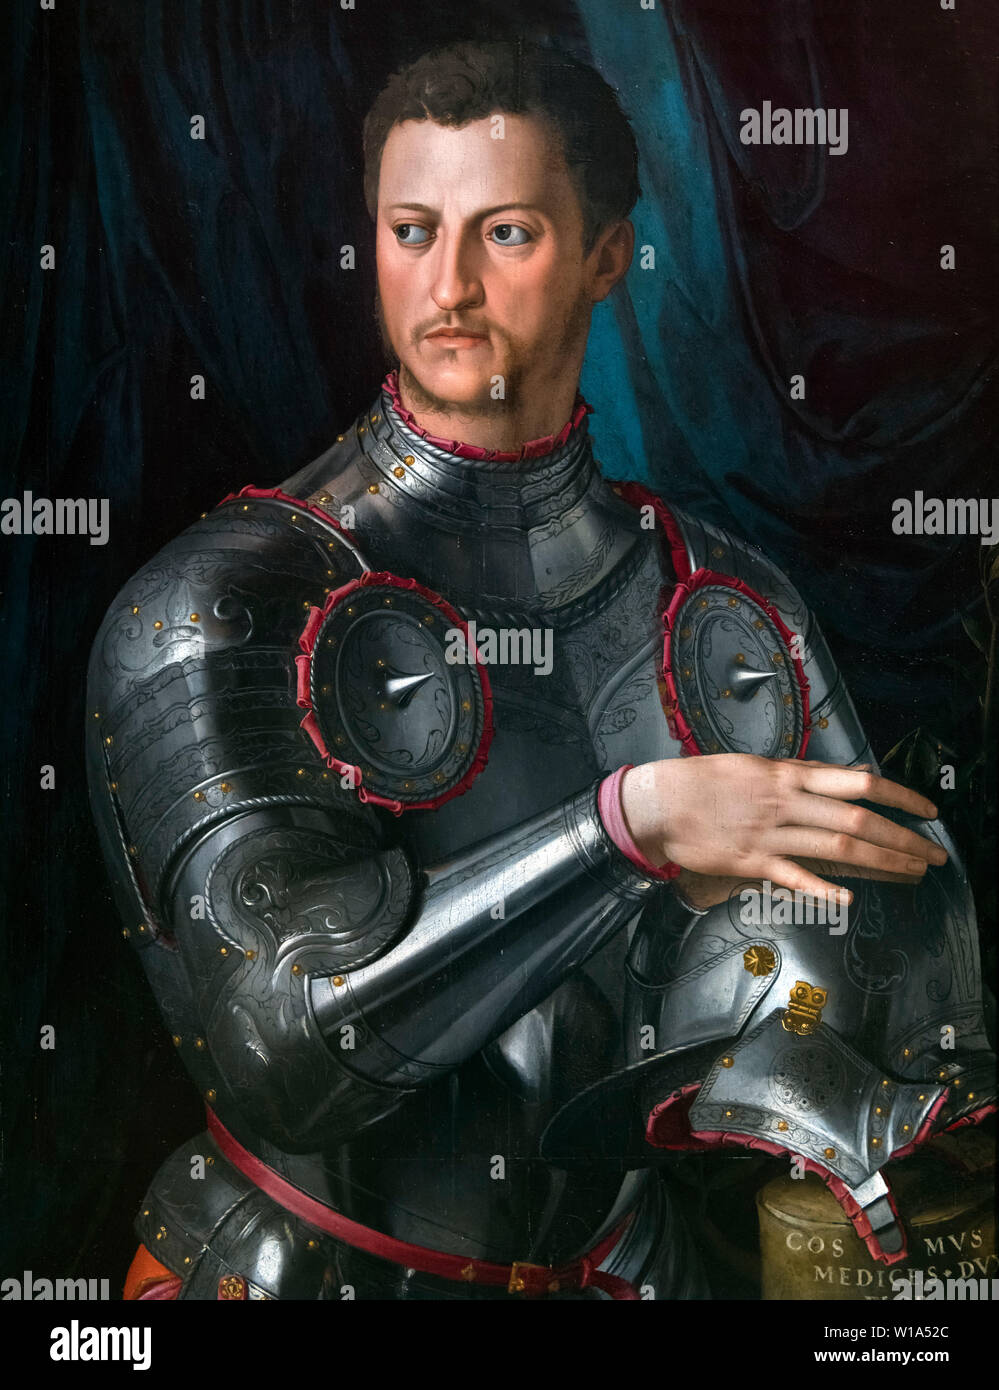 Cosimo I de' Medici (1519-1574), Grand Duke of Tuscany. Portrait, entitled Cosimo I de Medici in Armour, by Agnolo Bronzino (1503-1572), oil on panel, 1540s.  Cosimo I is best remembered today for the creation of the Uffizi gallery in Florence. Stock Photo